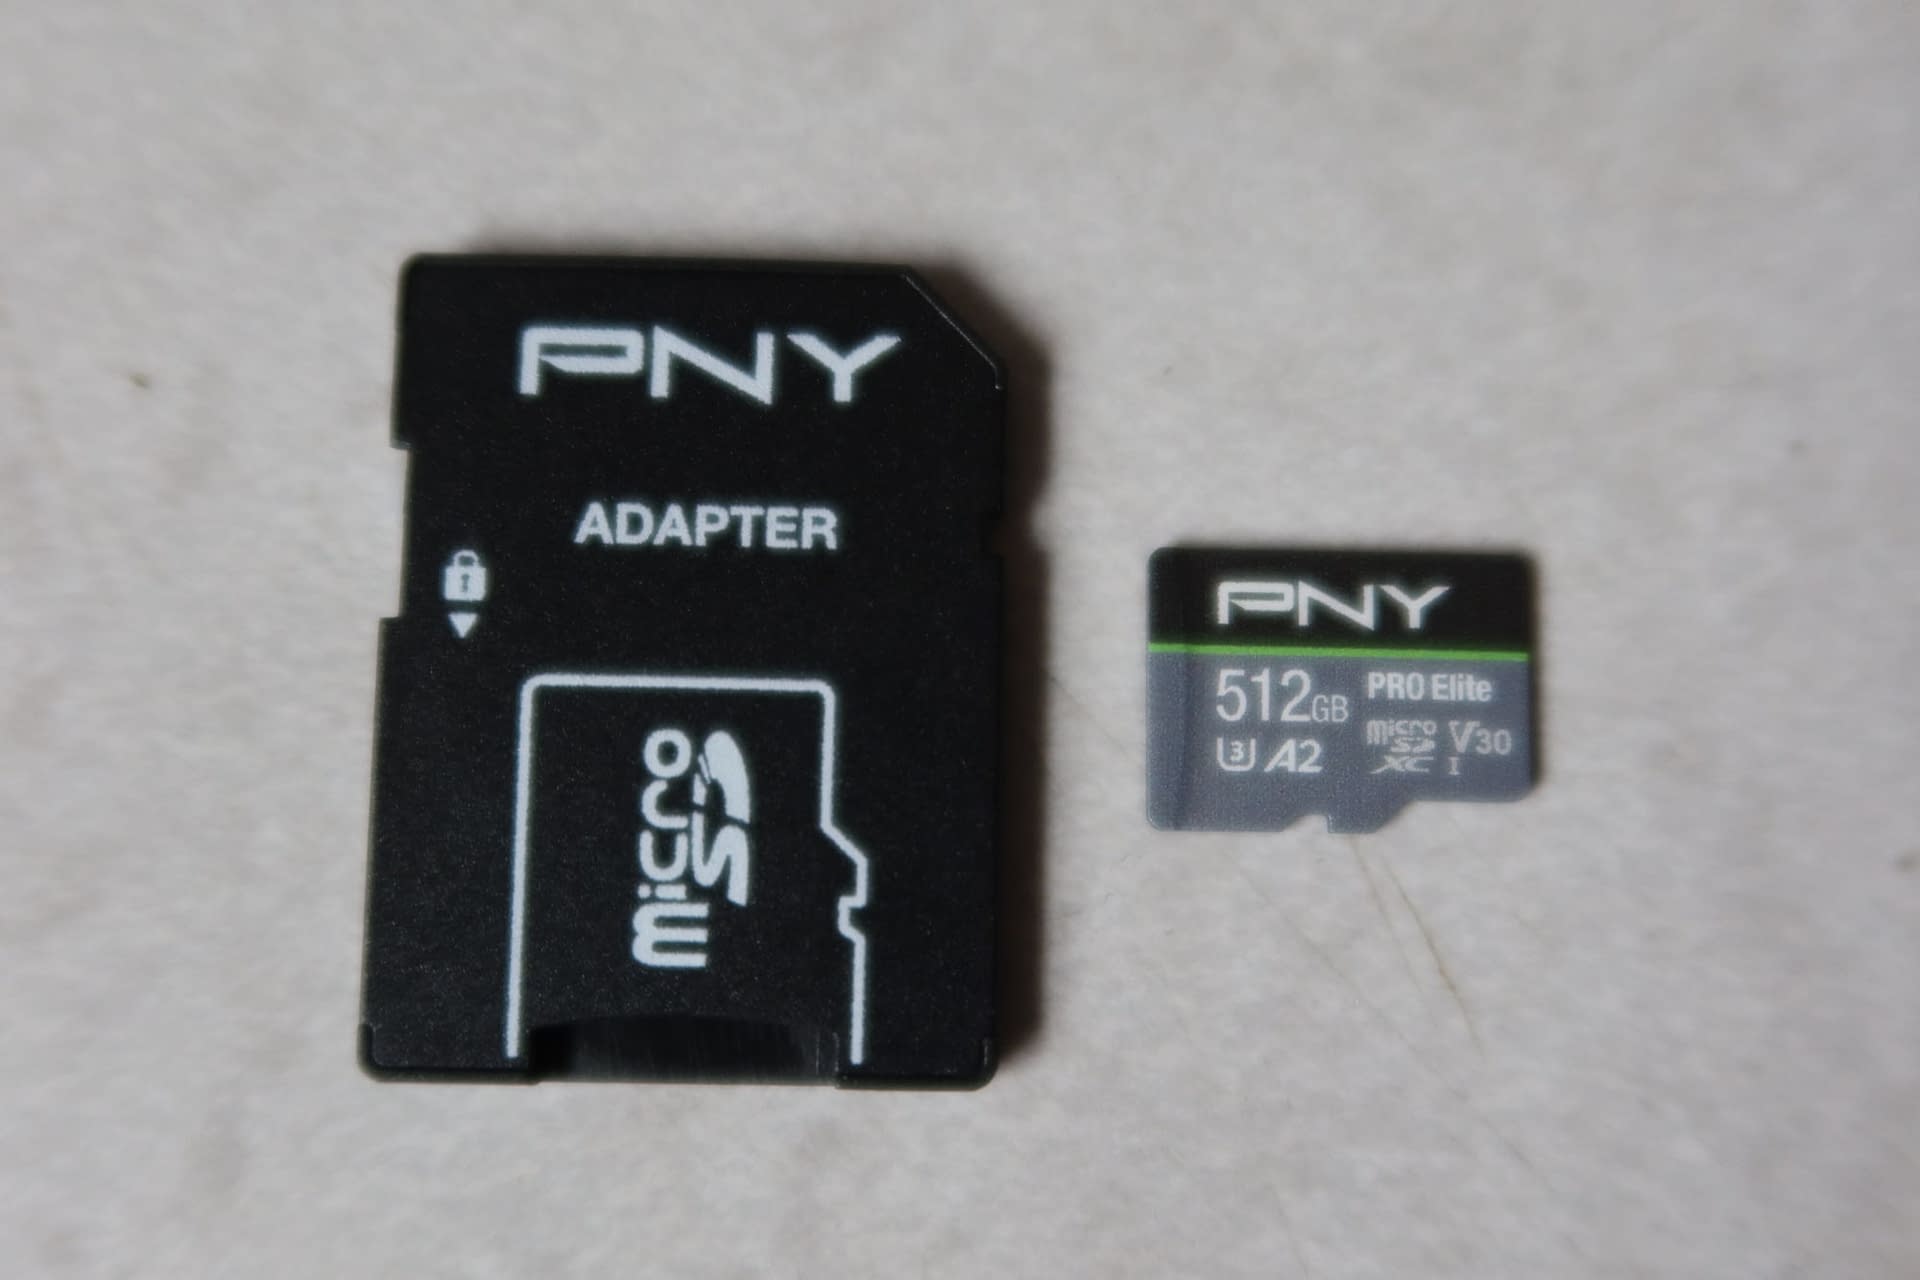 Why Do You Need An Adapter For A Micro SD Card? (Explained)